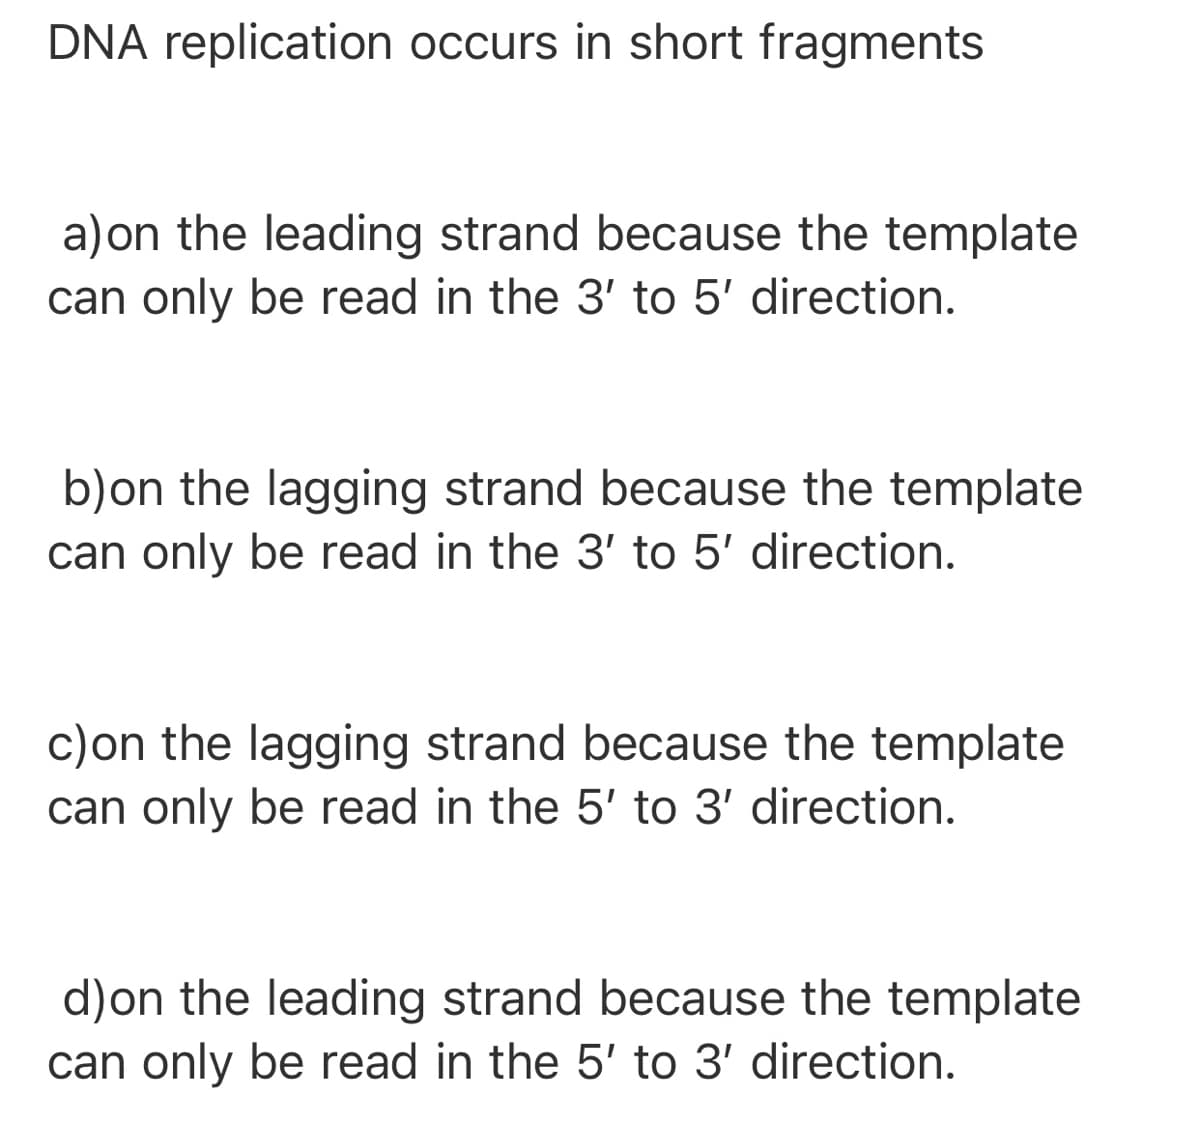 DNA replication occurs in short fragments
a)on the leading strand because the template
can only be read in the 3' to 5' direction.
b)on the lagging strand because the template
can only be read in the 3' to 5' direction.
c)on the lagging strand because the template
can only be read in the 5' to 3' direction.
d)on the leading strand because the template
can only be read in the 5' to 3' direction.
